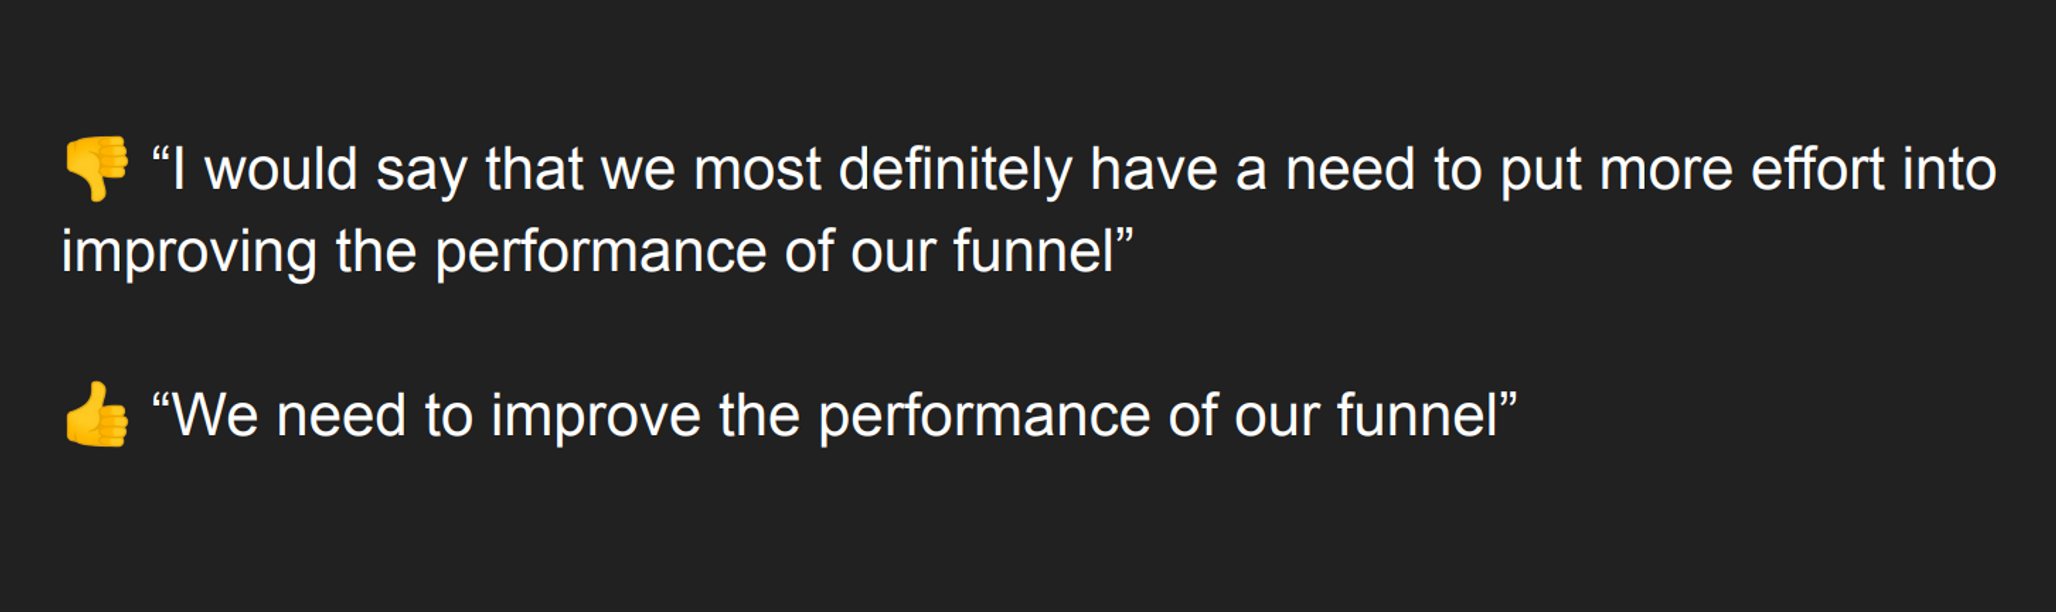 👎 “I would say that we most definitely have a need to put more effort into improving the performance of our funnel”
👍 “We need to improve the performance of our funnel”